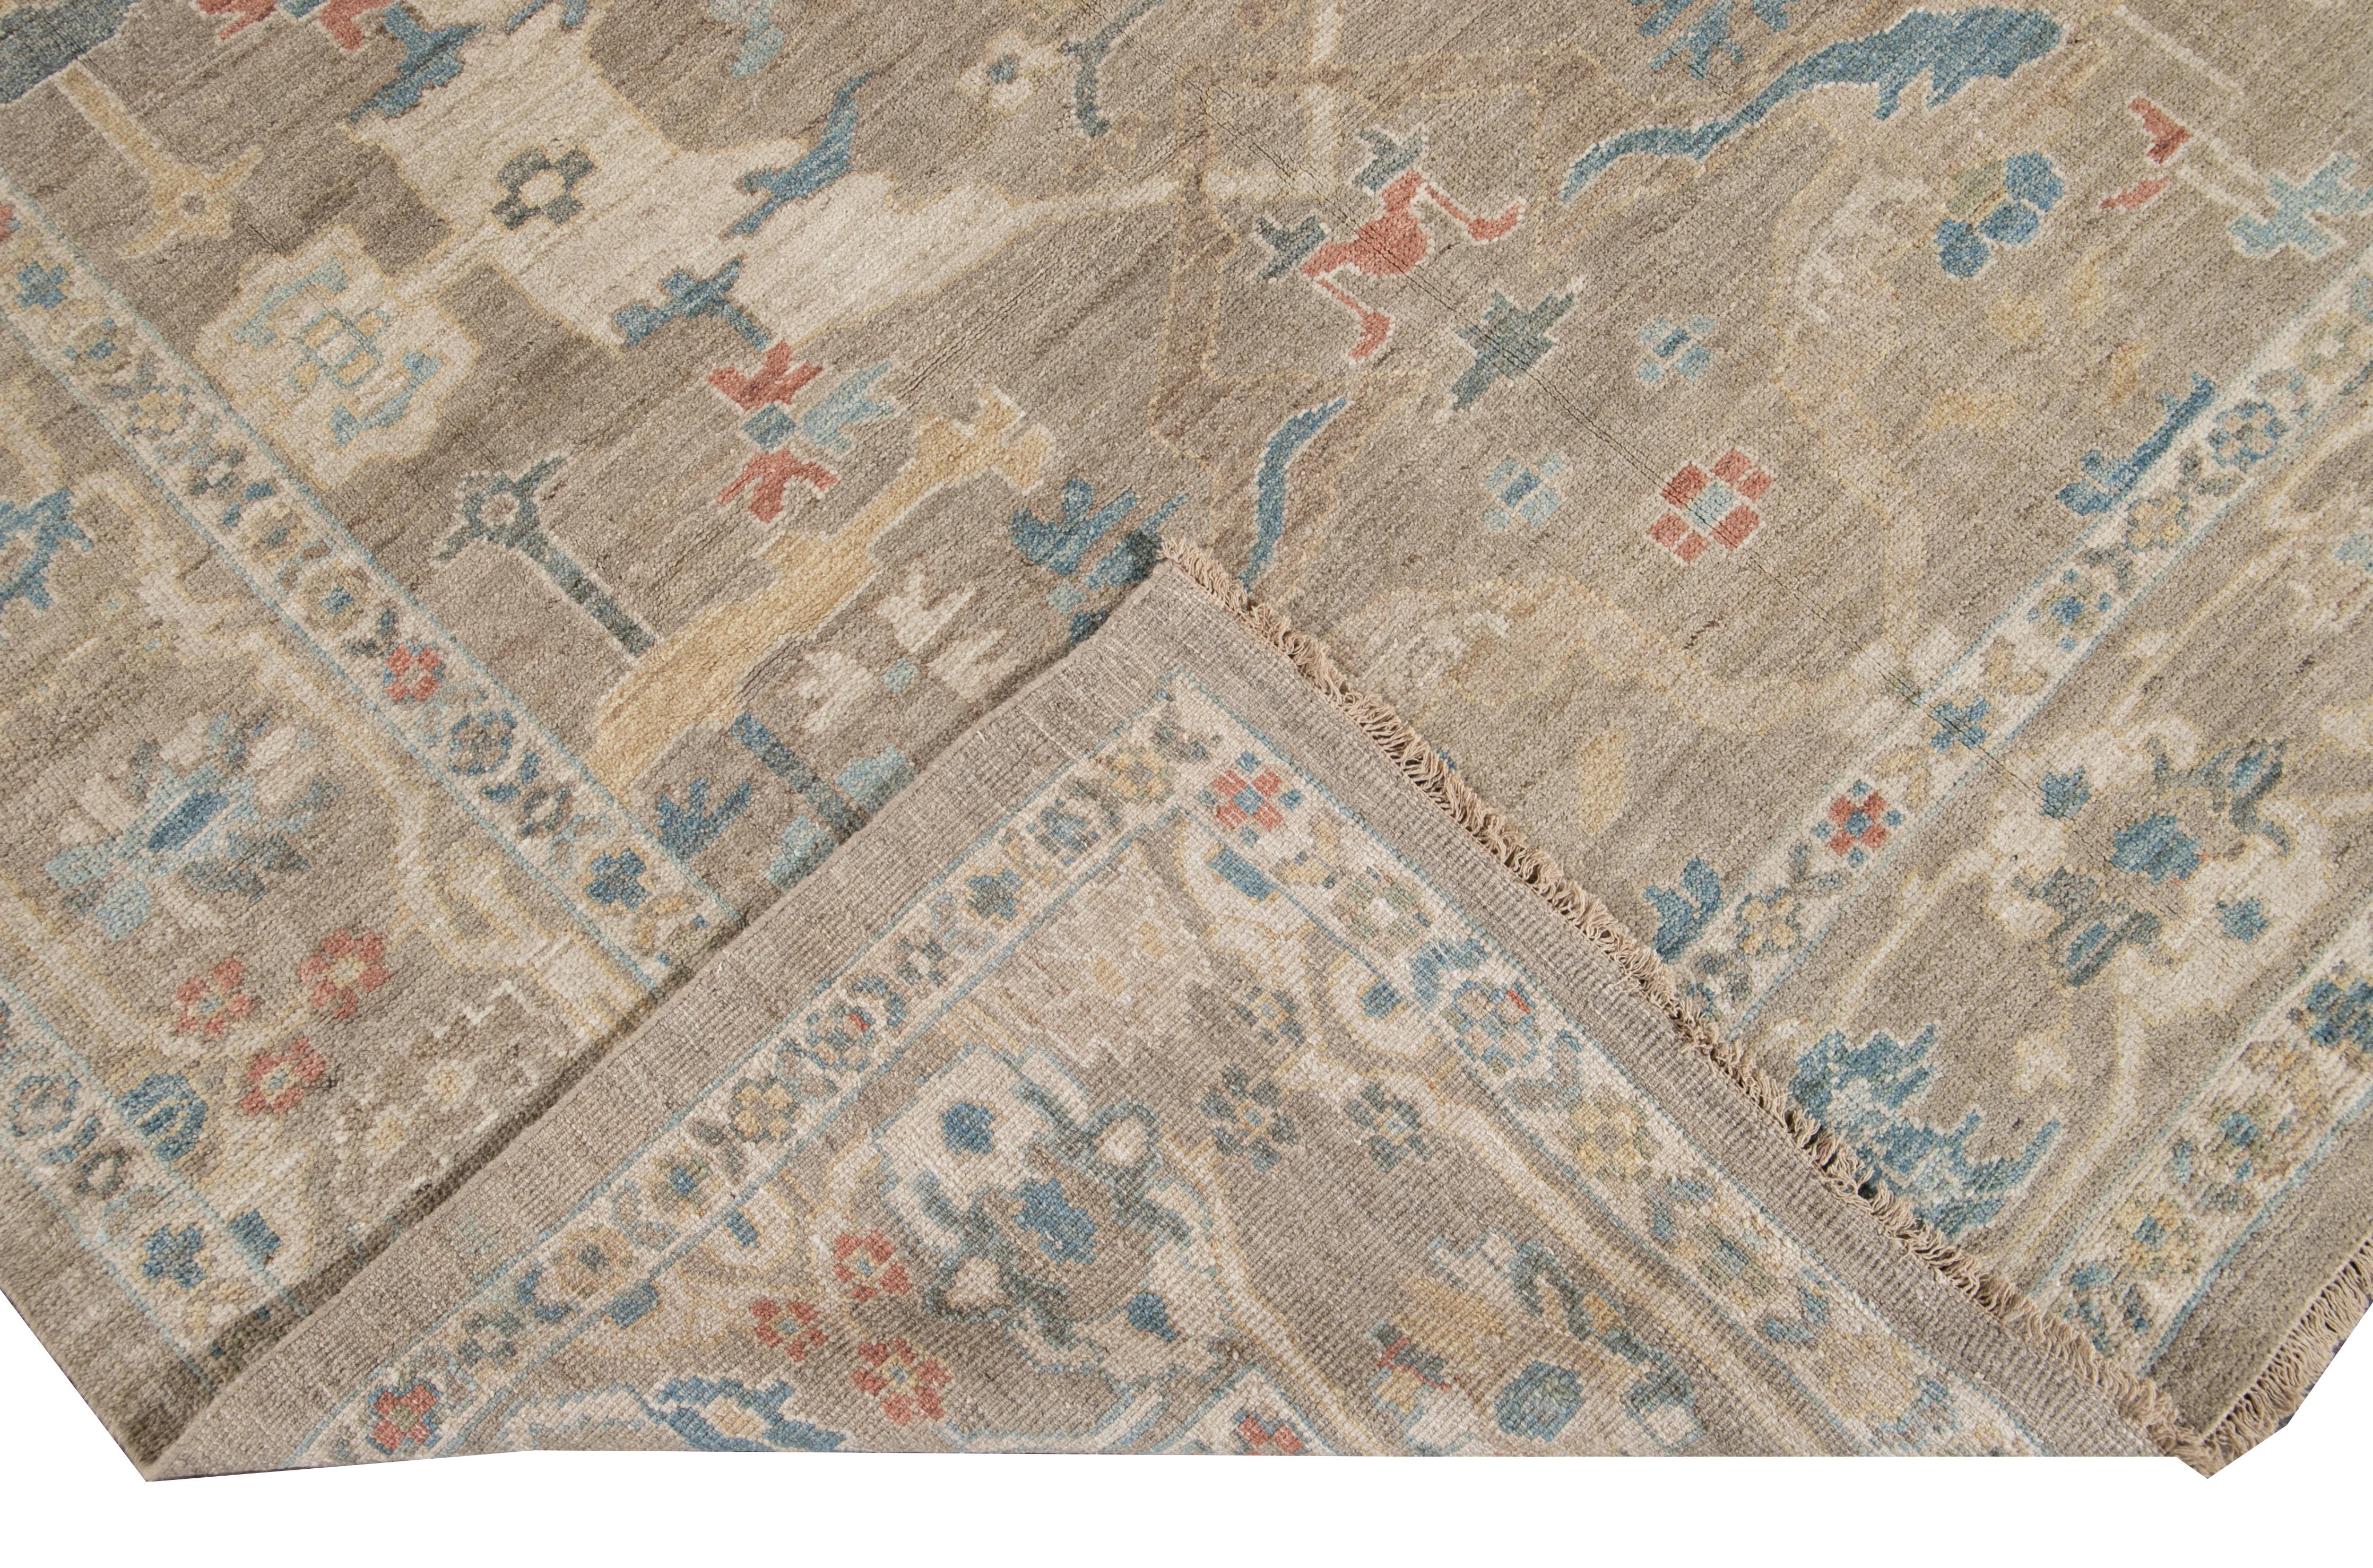 Beautiful modern Sultanabad hand knotted wool rug with a gray field. This Sultanabad rug has a blue, beige, red, and ivory accent in a gorgeous all-over Classic floral medallion design.

This rug measures: 6'11